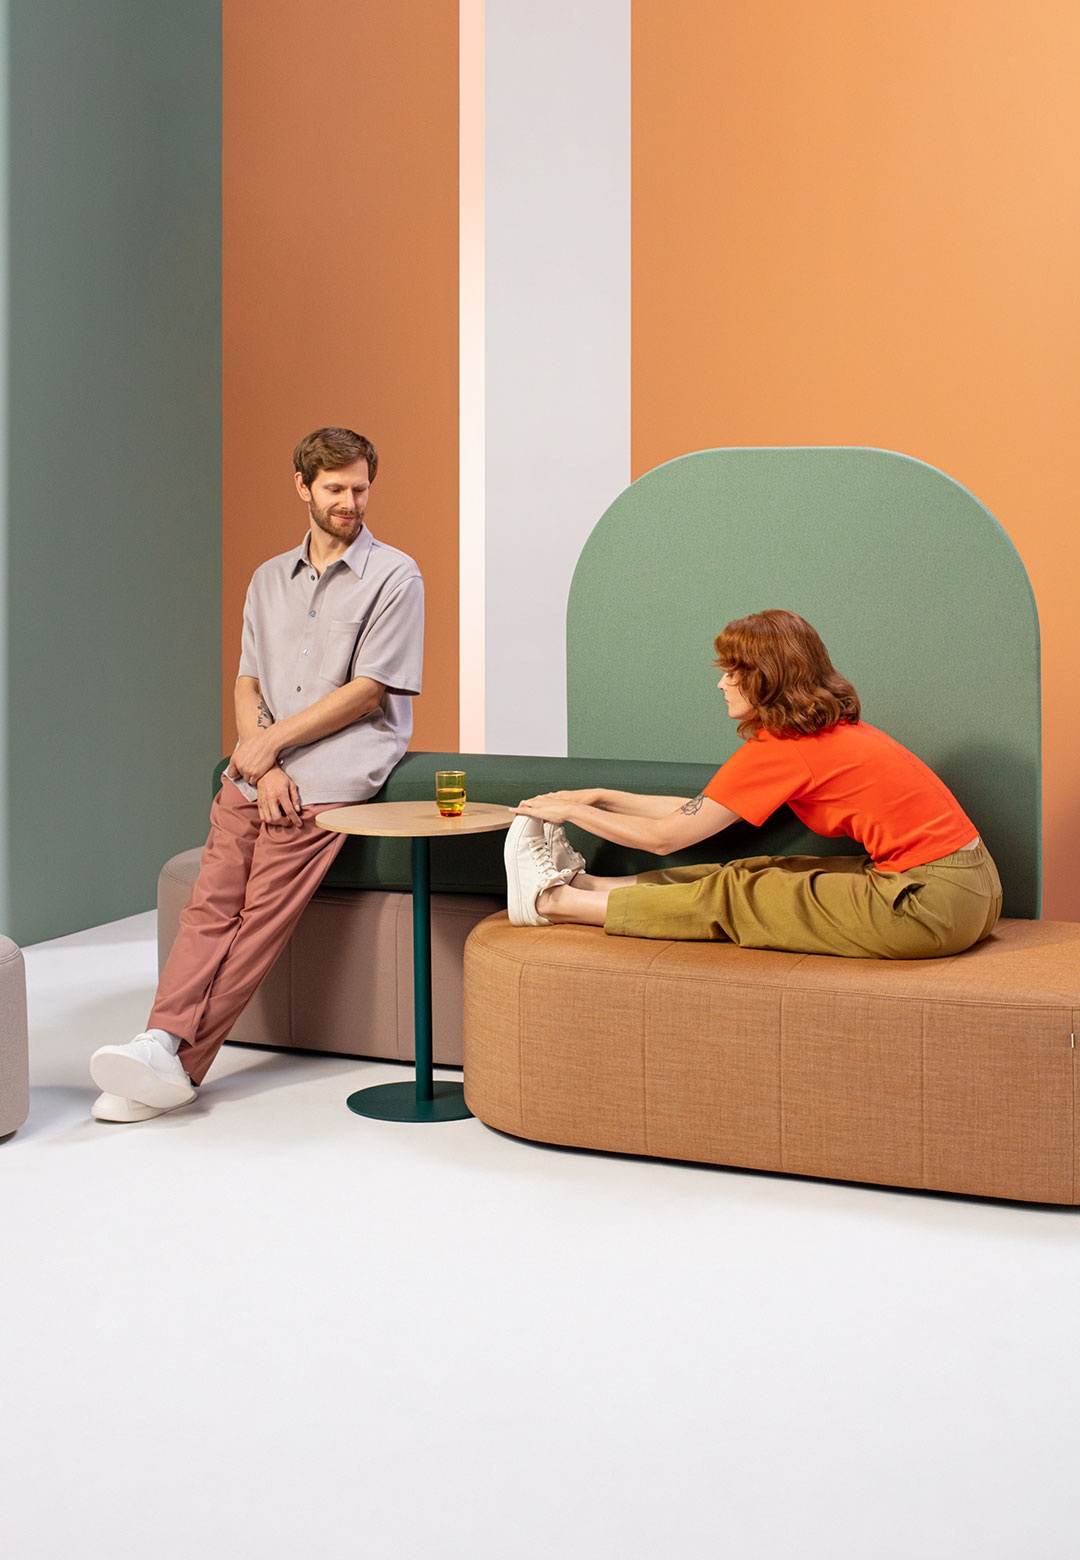 ‘Revo’ by Pearson Lloyd and Profim strives to revolutionise workspace design